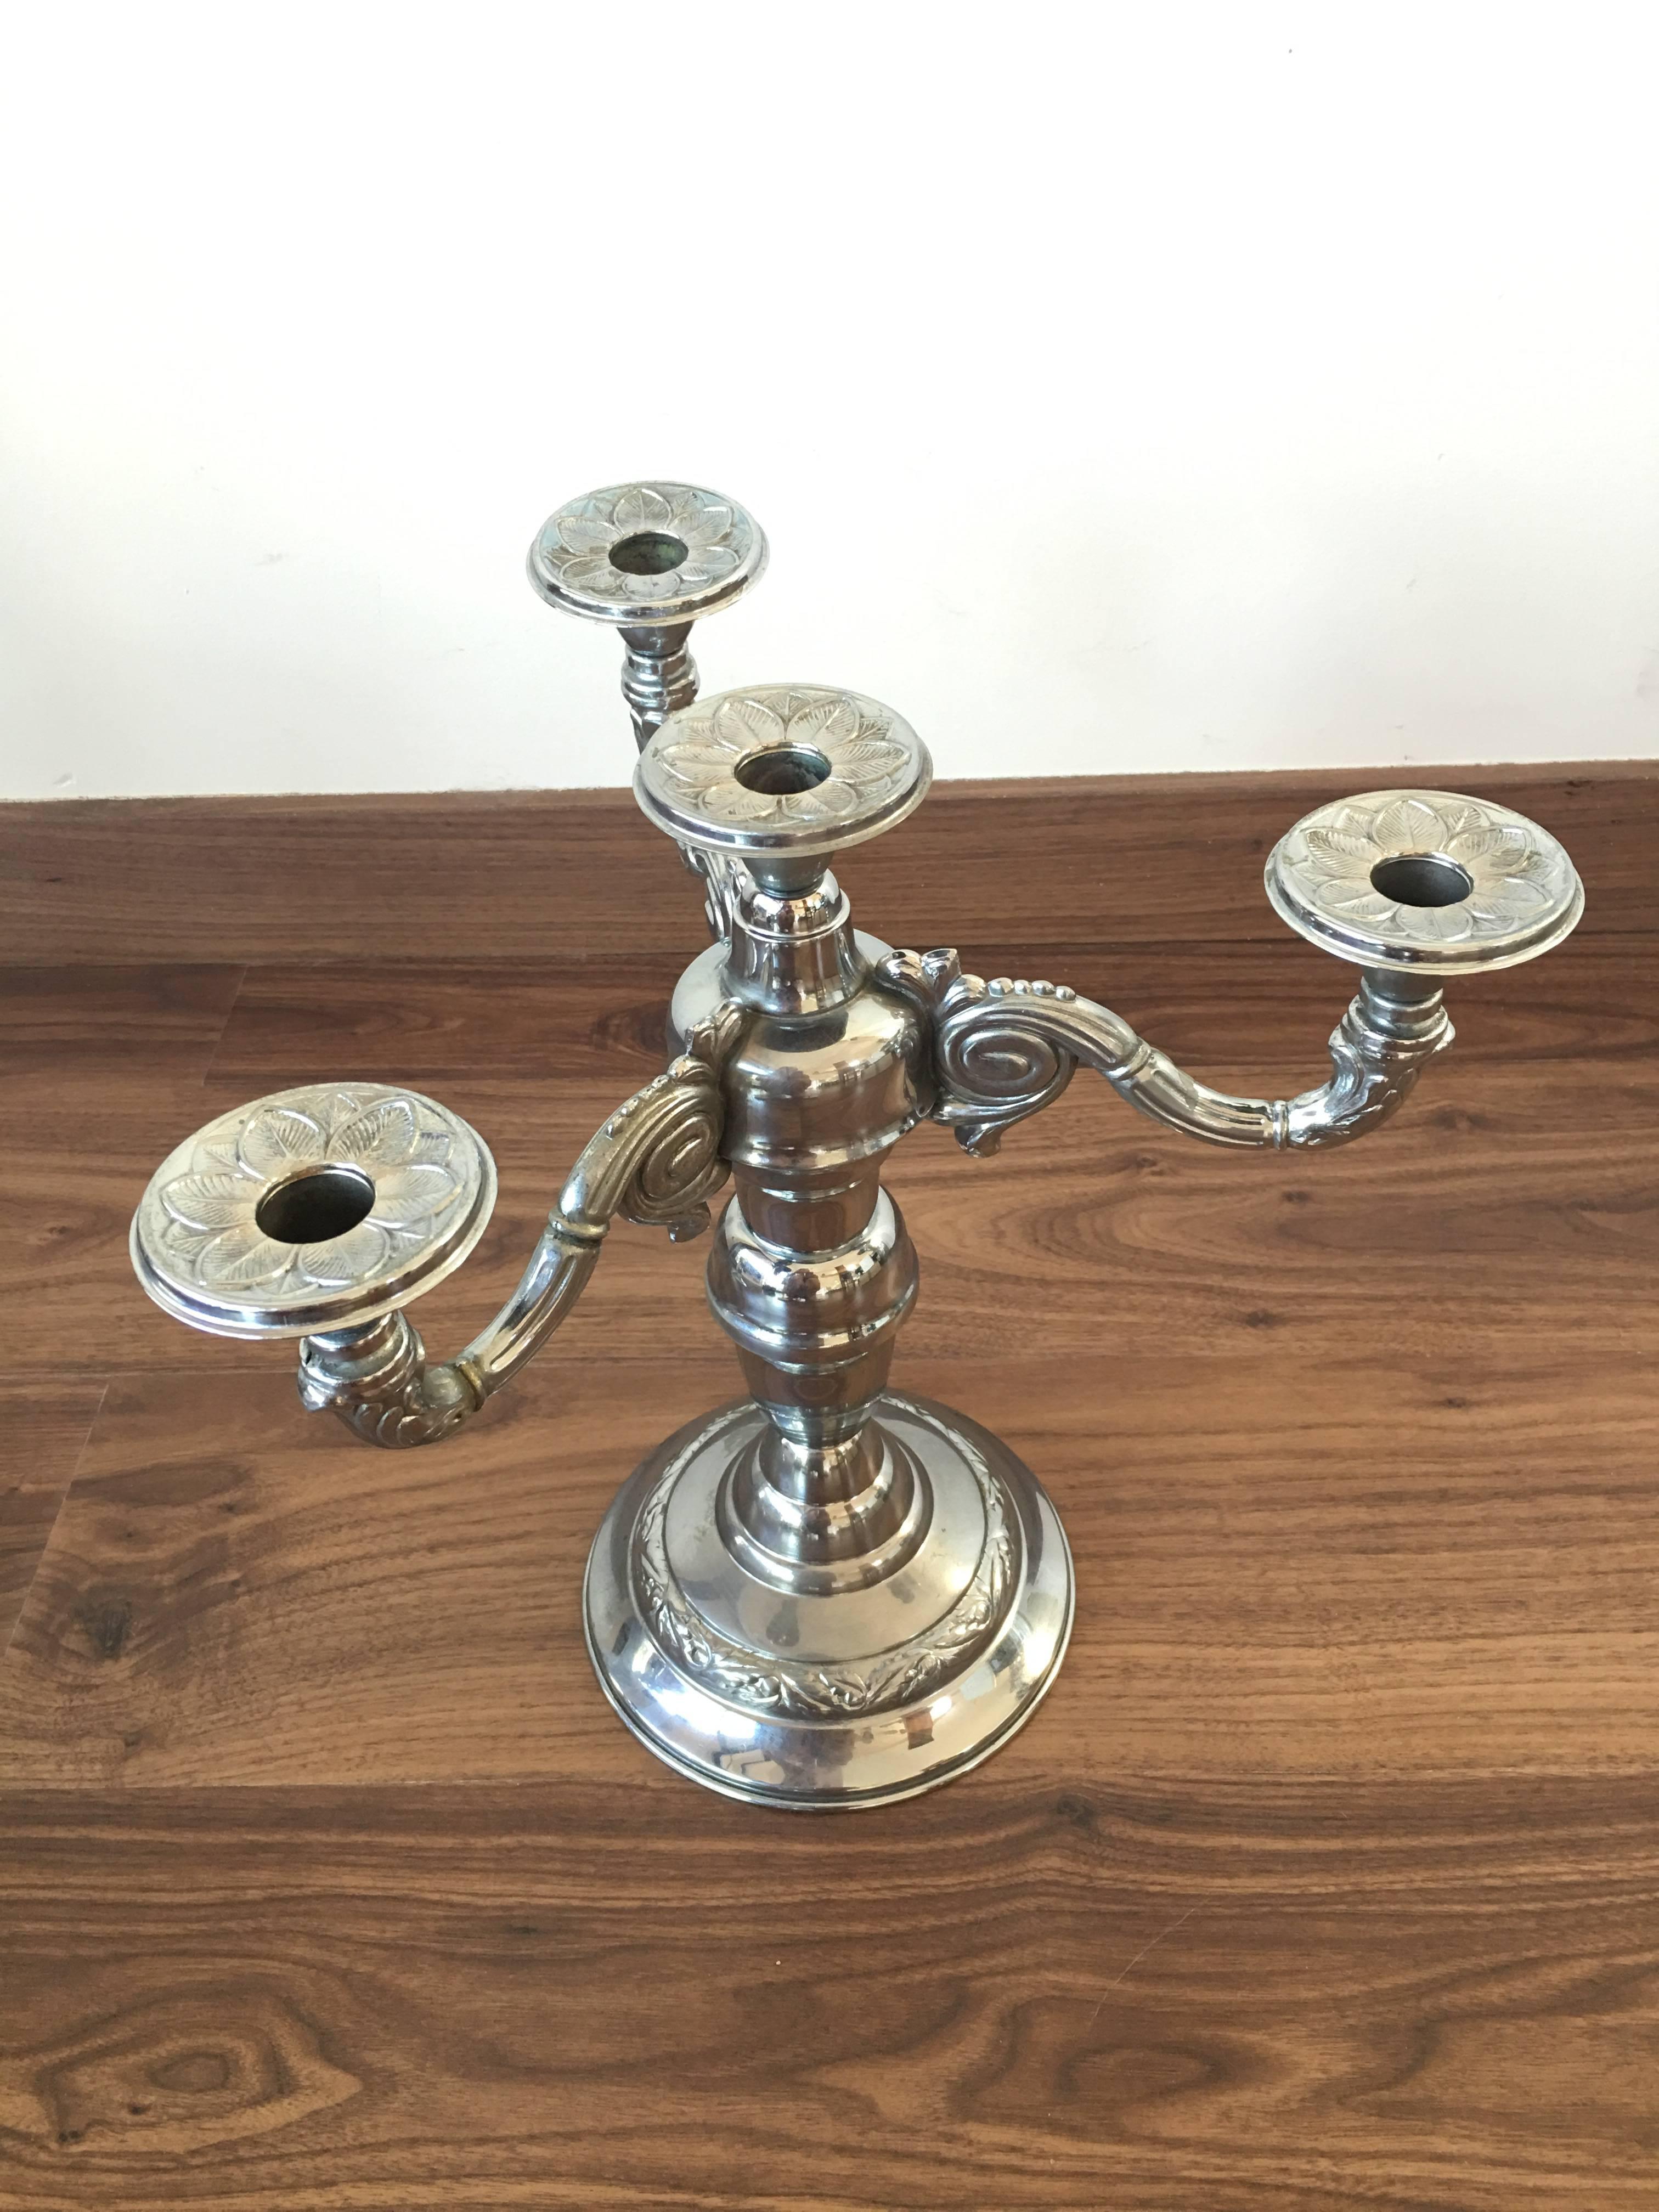 Neoclassical Pair of Four-Armed Art Deco Candlesticks, 1930s-1940s, Sweden For Sale